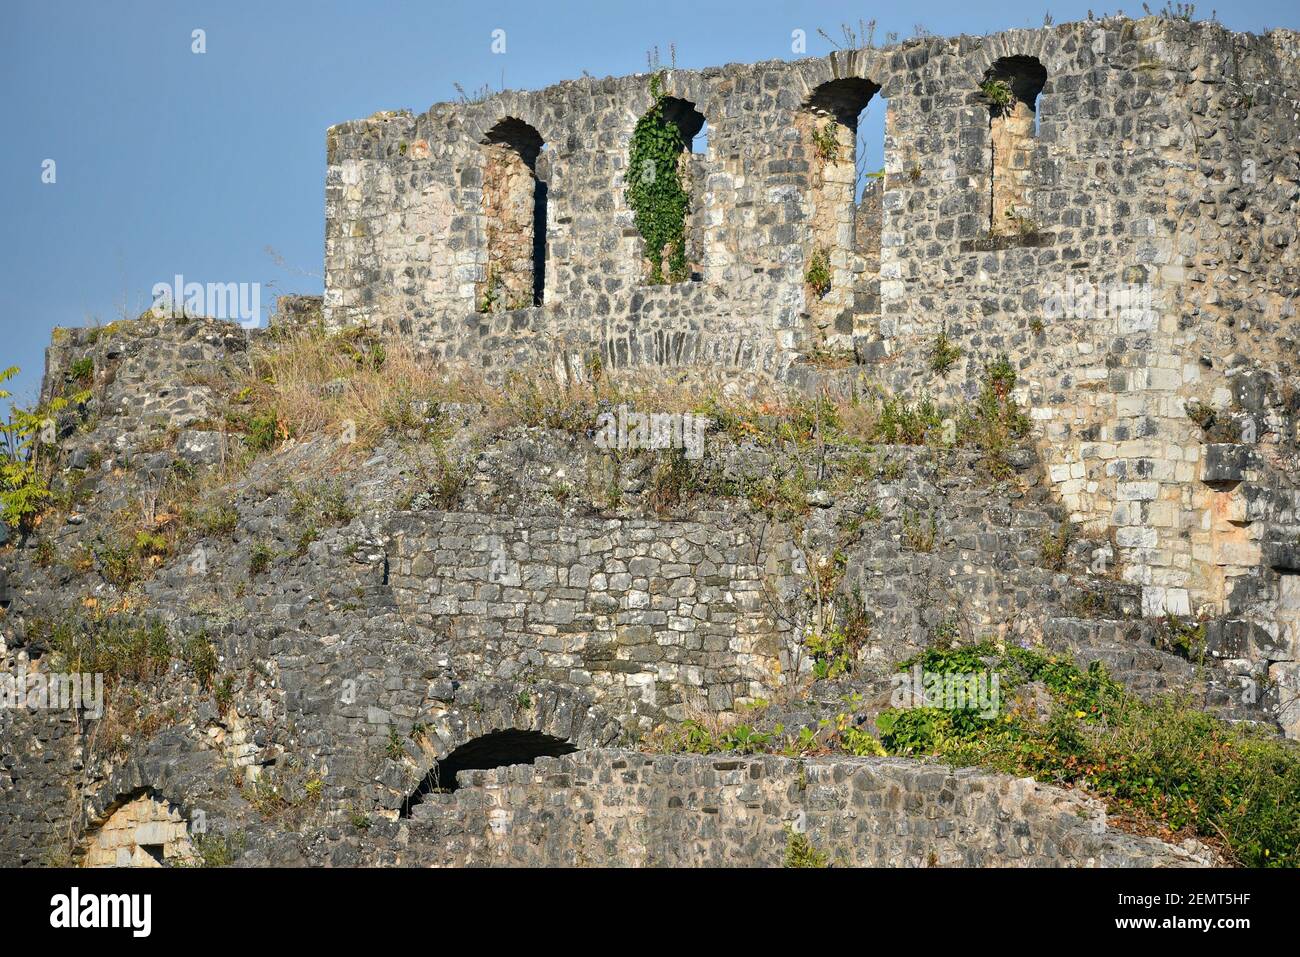 Stone wall ruins of the historic Medieval fortress citadel in Ioannina, Epirus Greece. Stock Photo